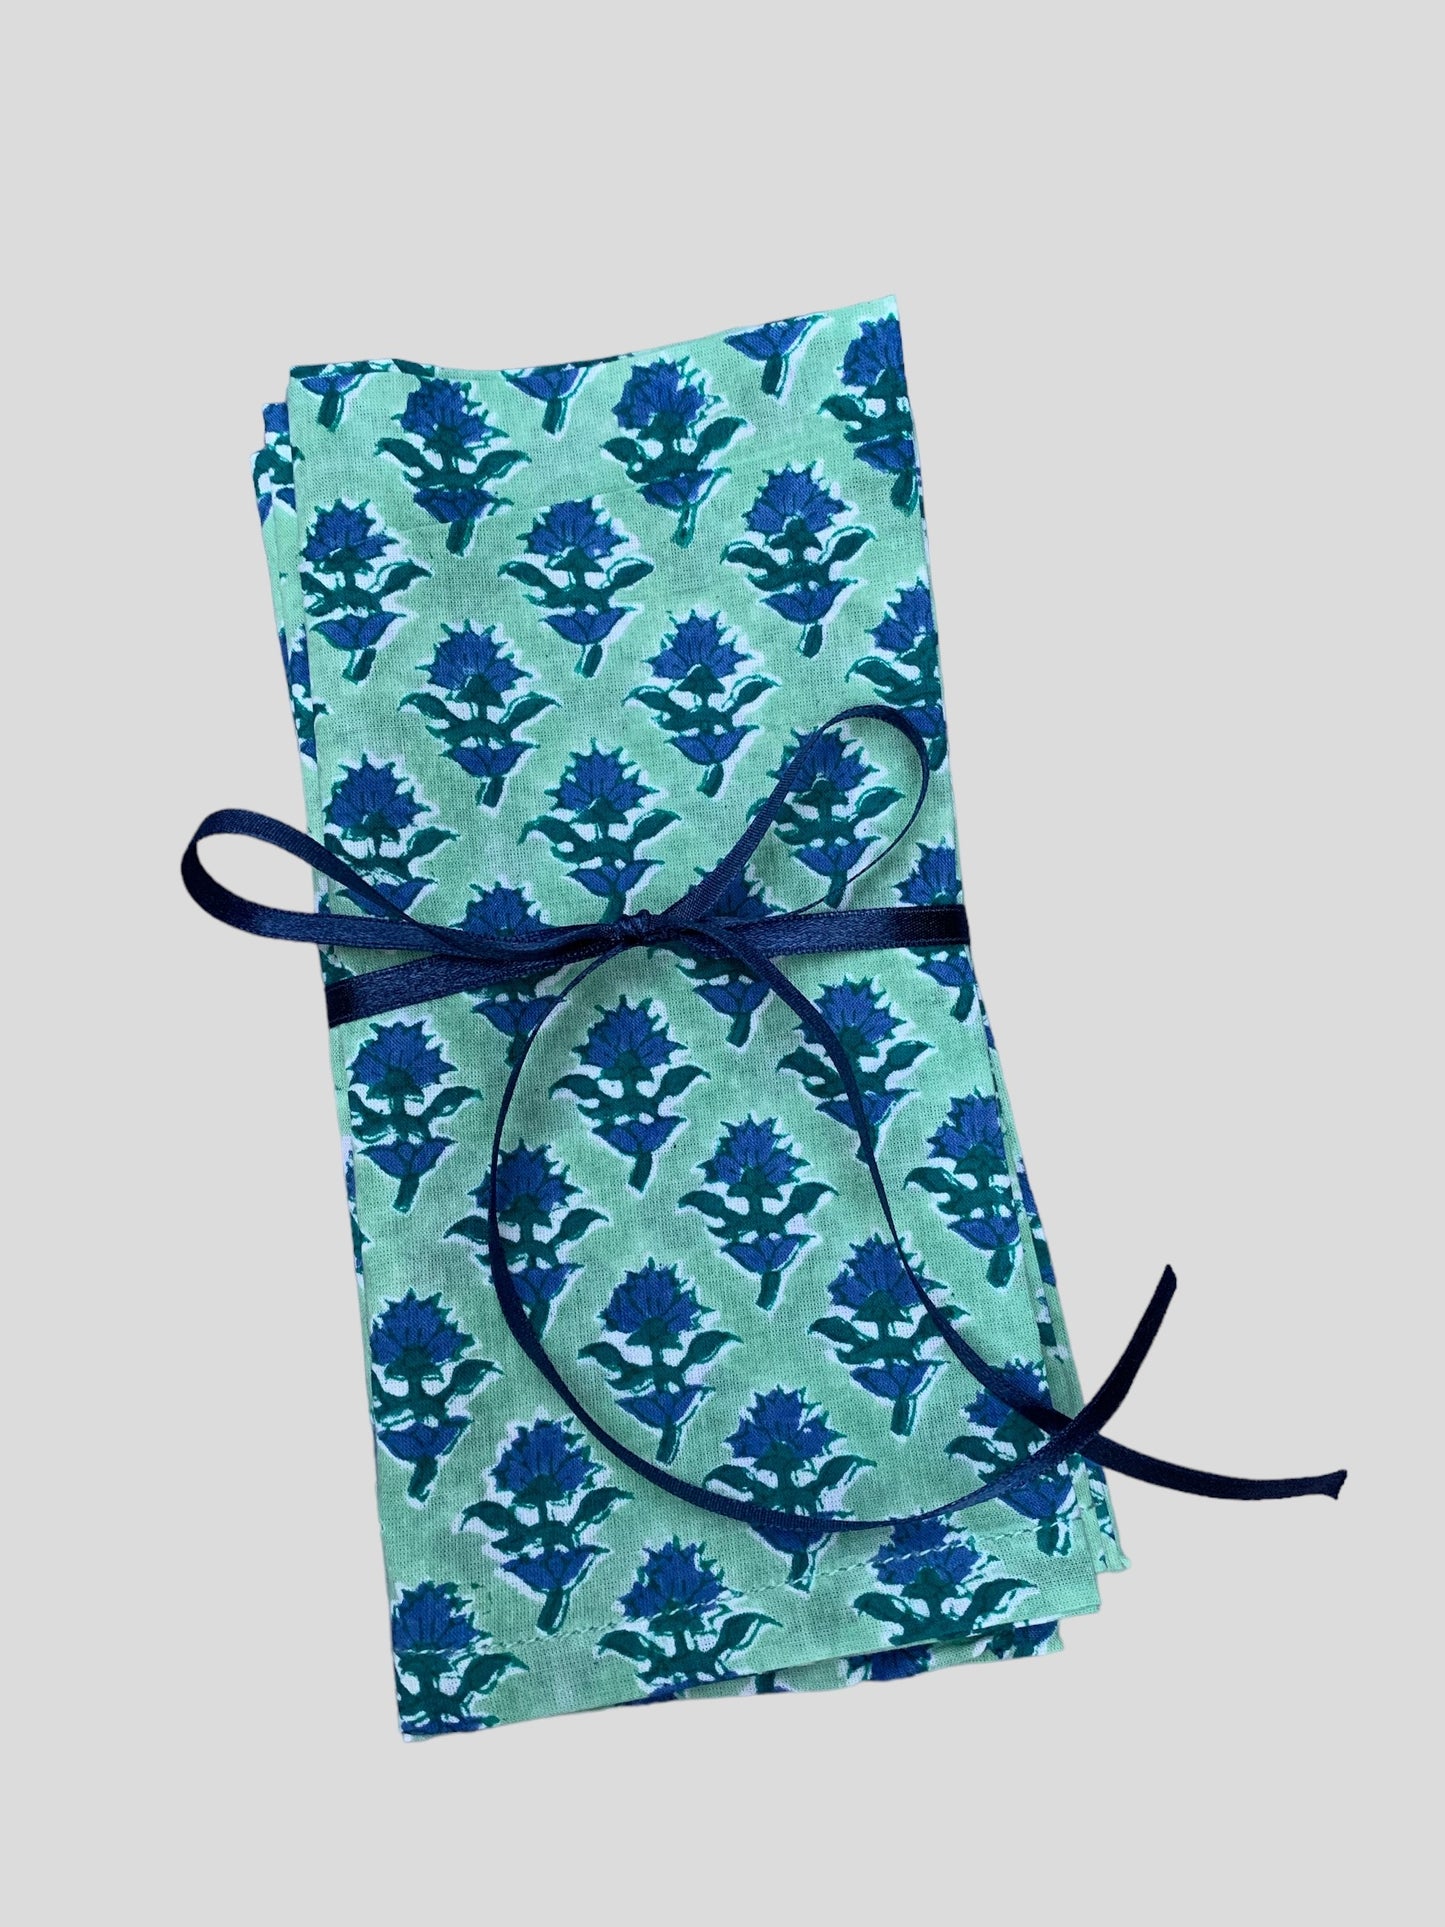 A set of 4 block printed napkins with a blue and green thistle design.  Tied with a blue ribbon.